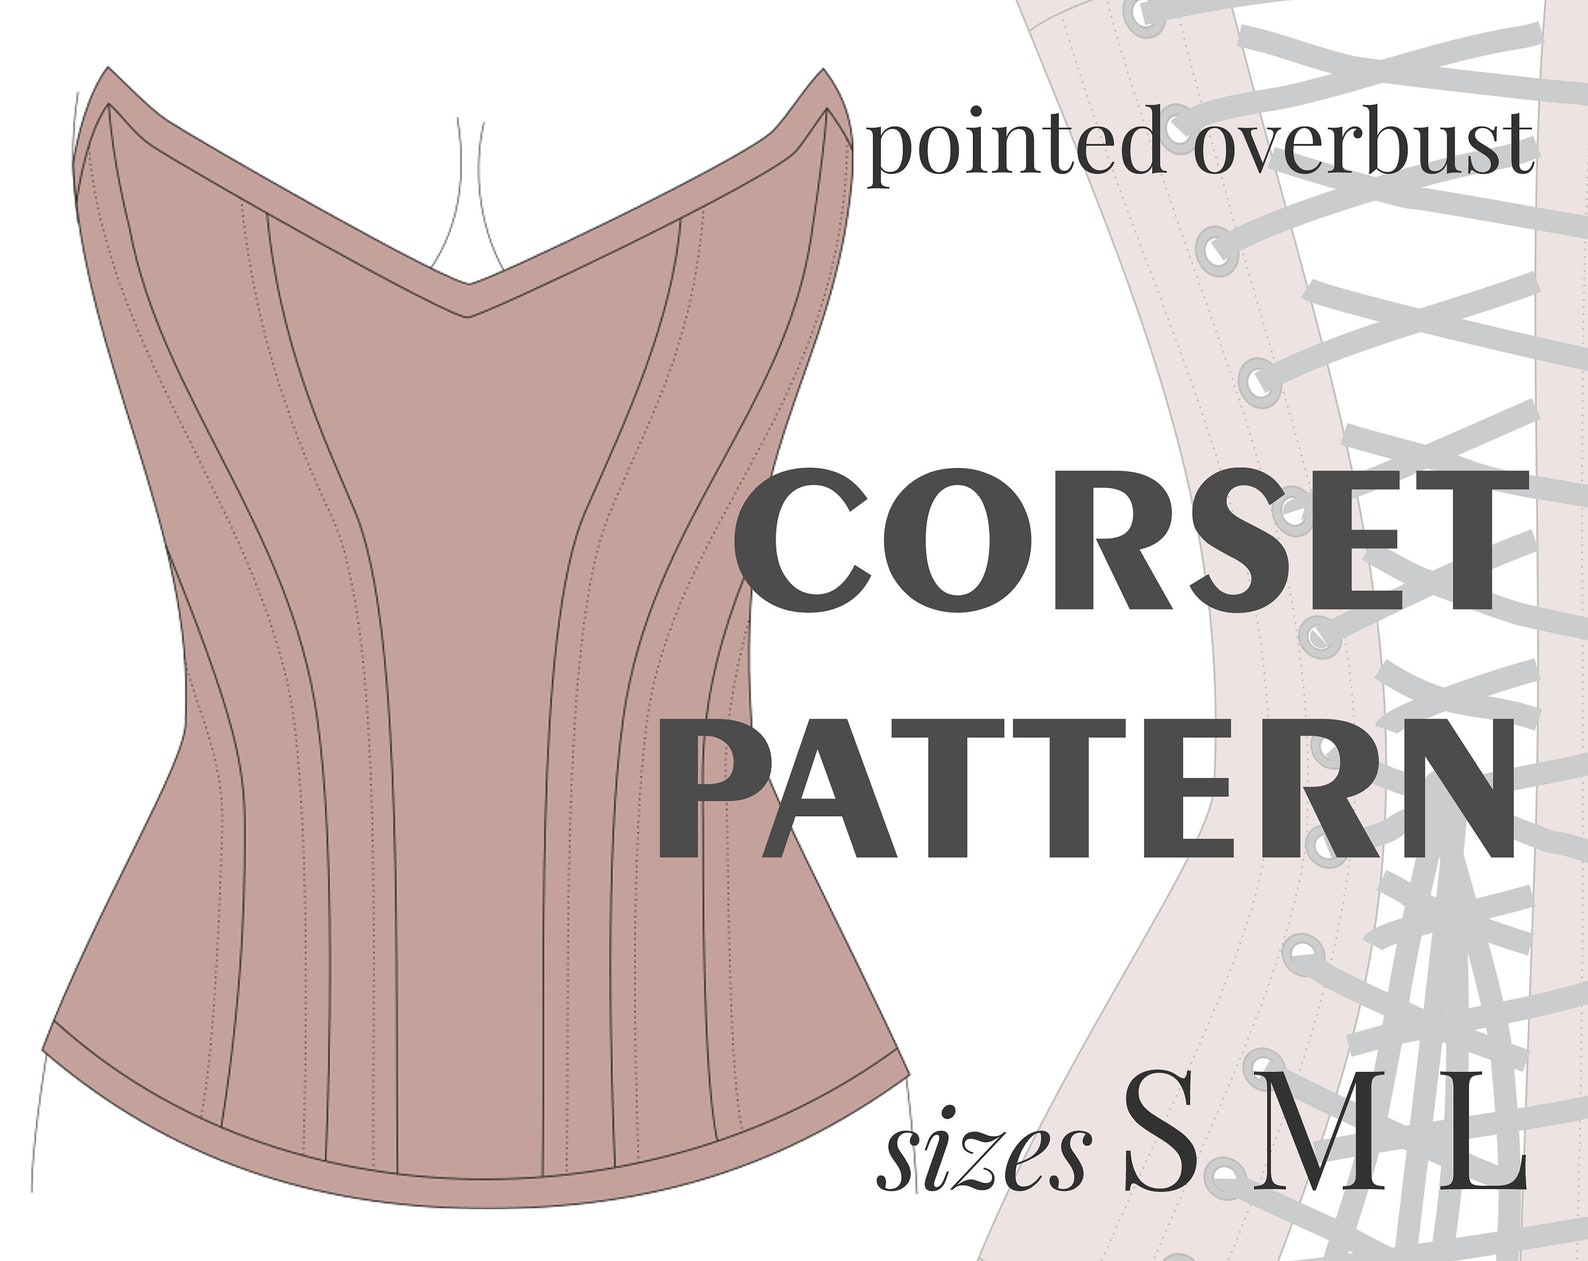 CORSET PATTERN Overbust Burlesque Pointed Style. Instant | Etsy